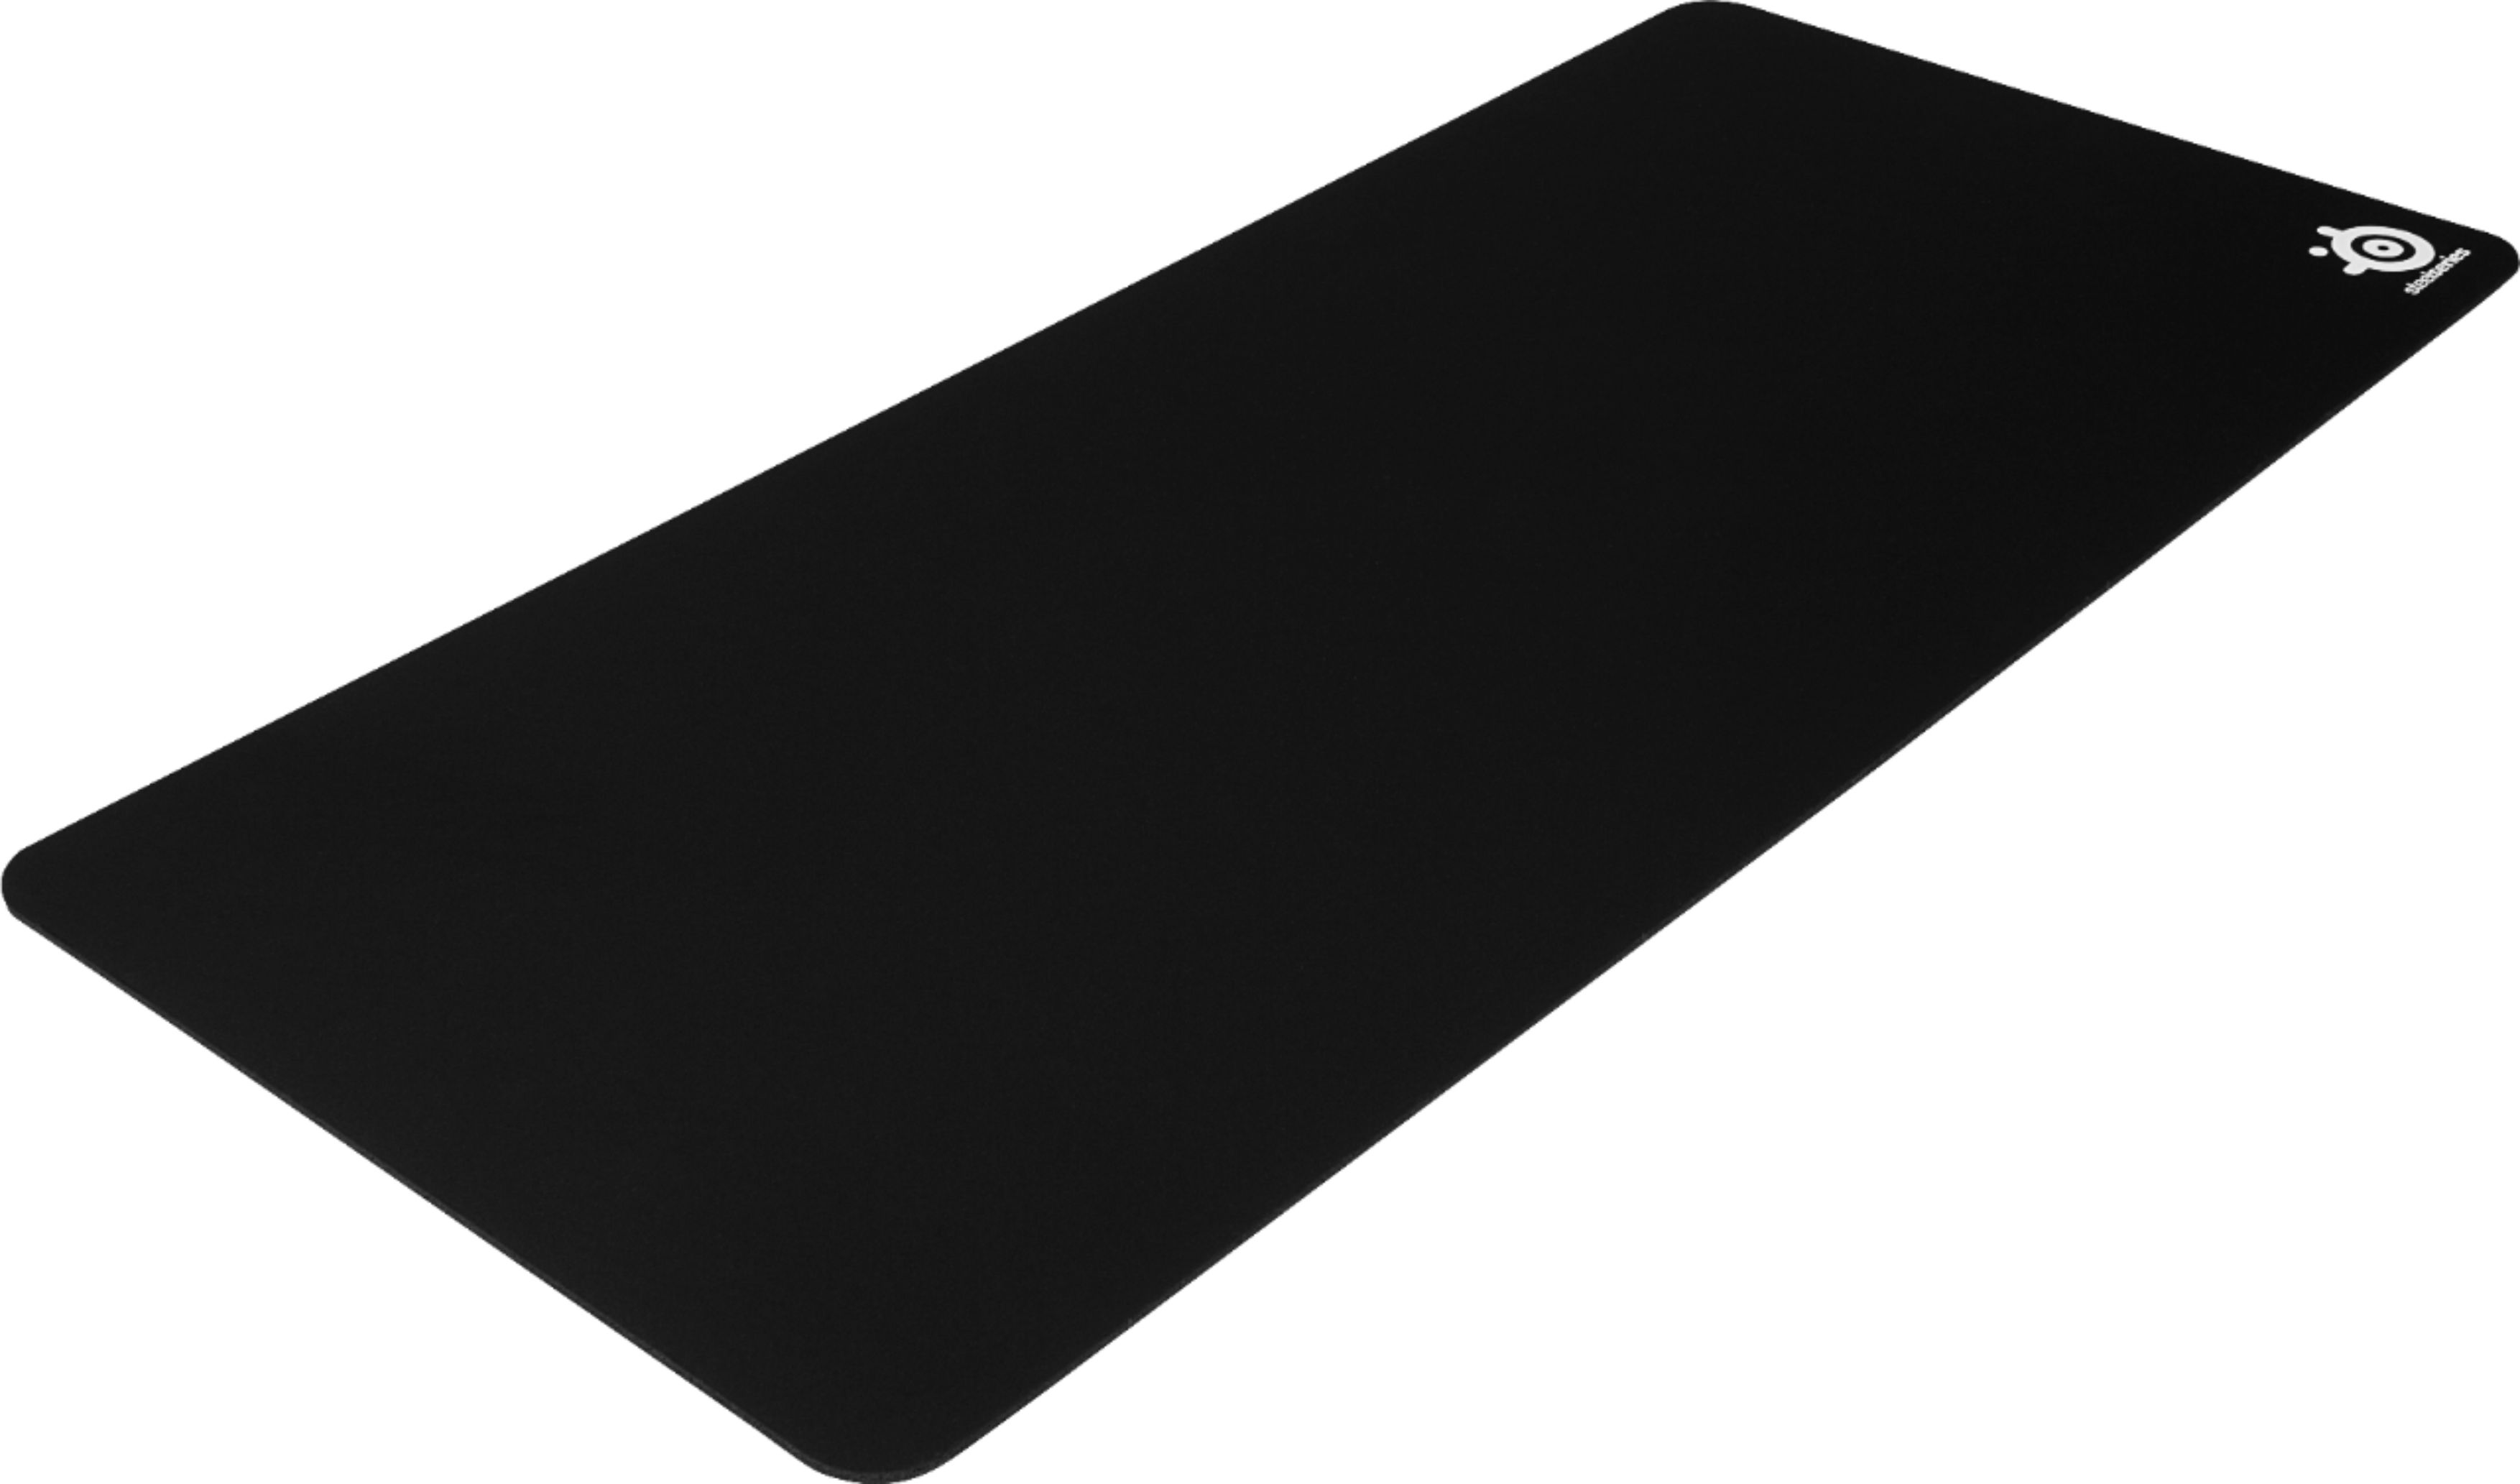 SteelSeries - Qck Cloth Gaming Mouse Pad (XXL) - Black